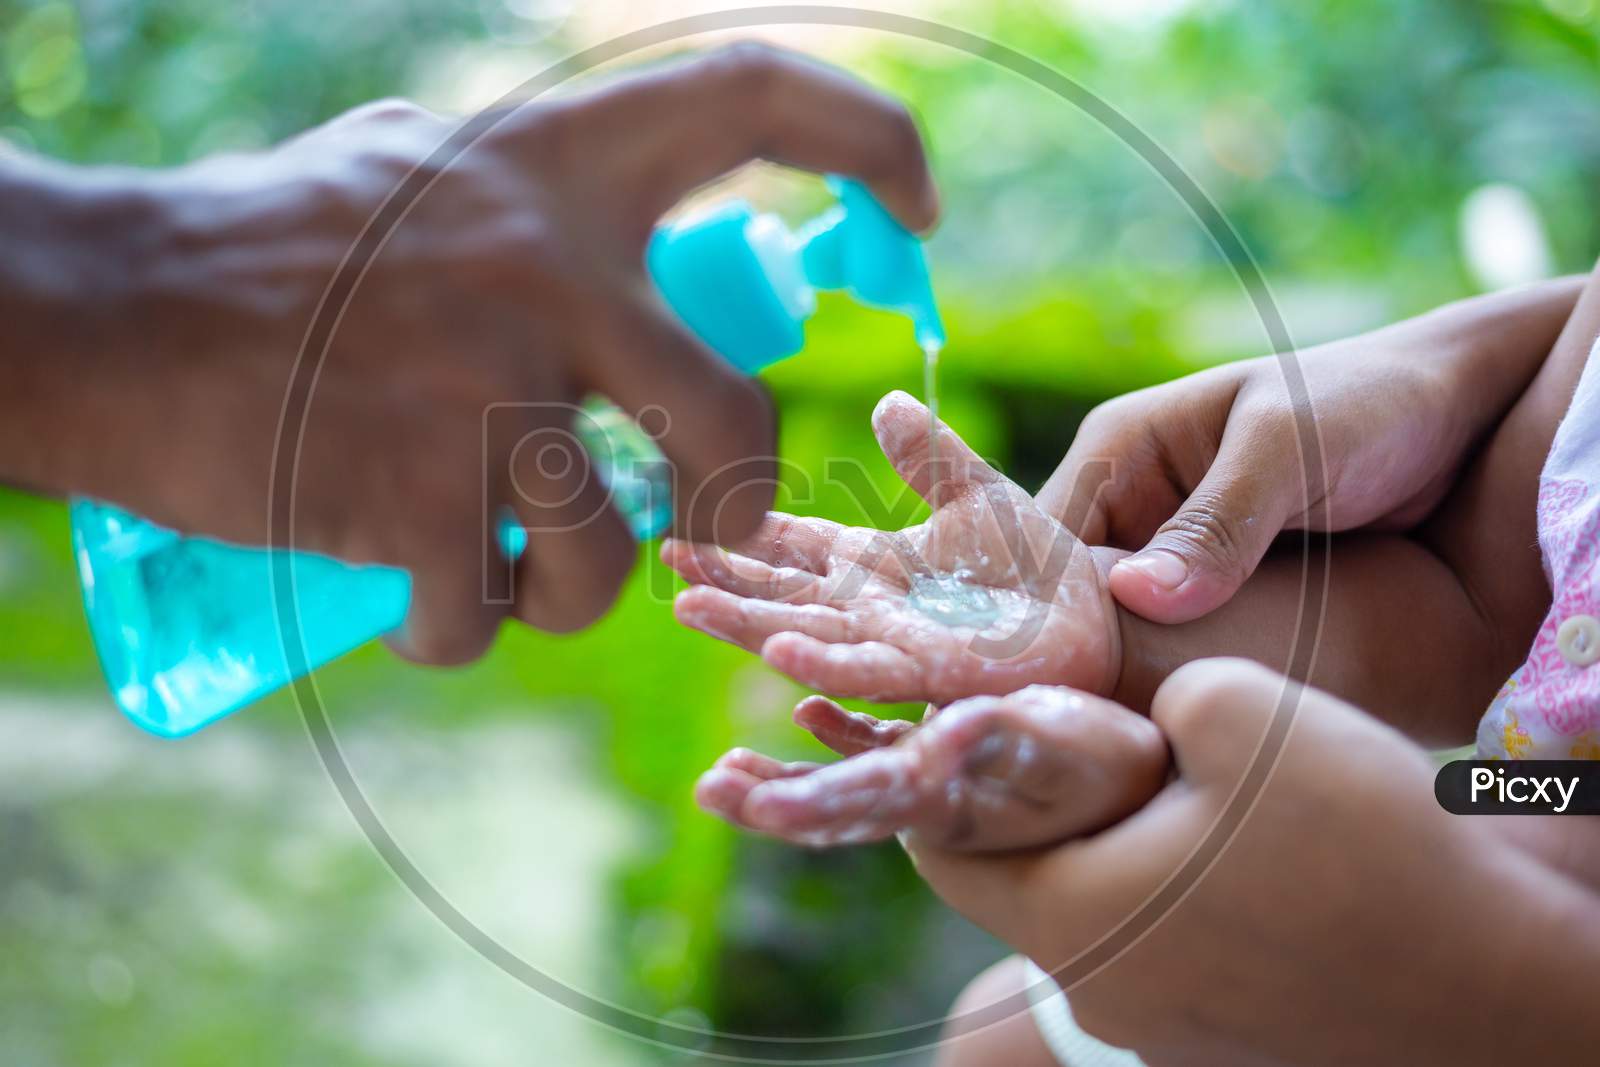 A Parent Teaching His Baby The Habit Of Handwashing With Liquid Hand Wash. To Prevent Coronavirus, Rubbing Your Hands With Soap Is An Expert Way To Stop The Spread Of Coronavirus.